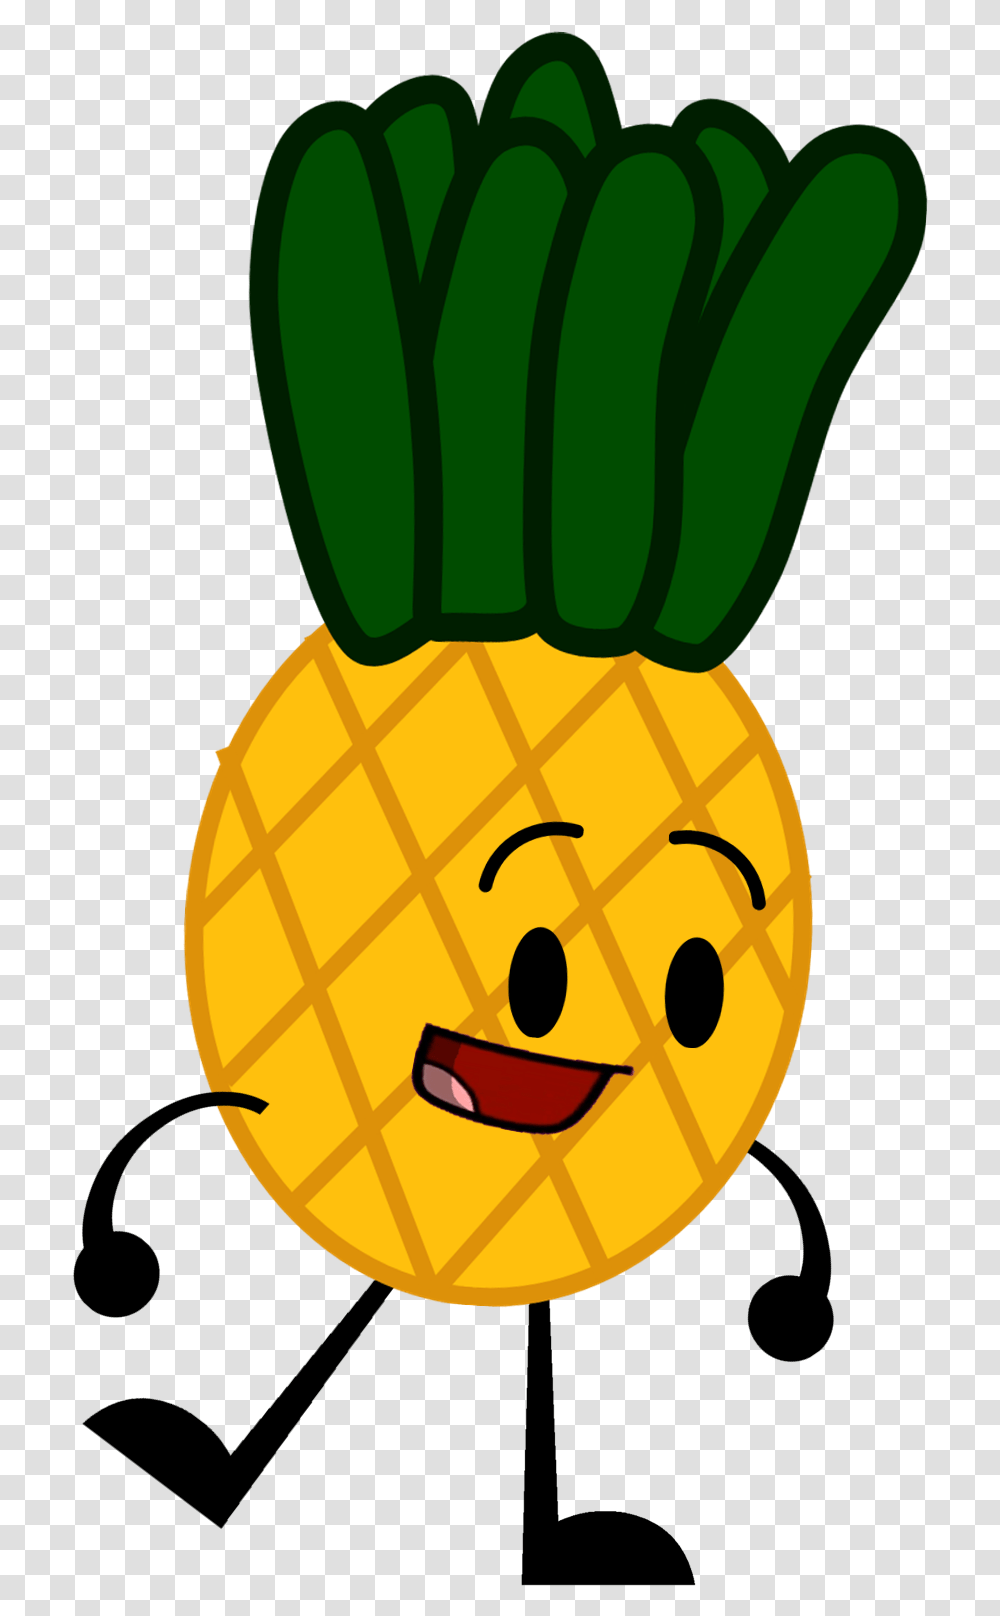 Download Hd Pineapple Clipart Object Bfdi Pineapple Yellow Objects Clip Art, Plant, Vegetable, Food, Produce Transparent Png